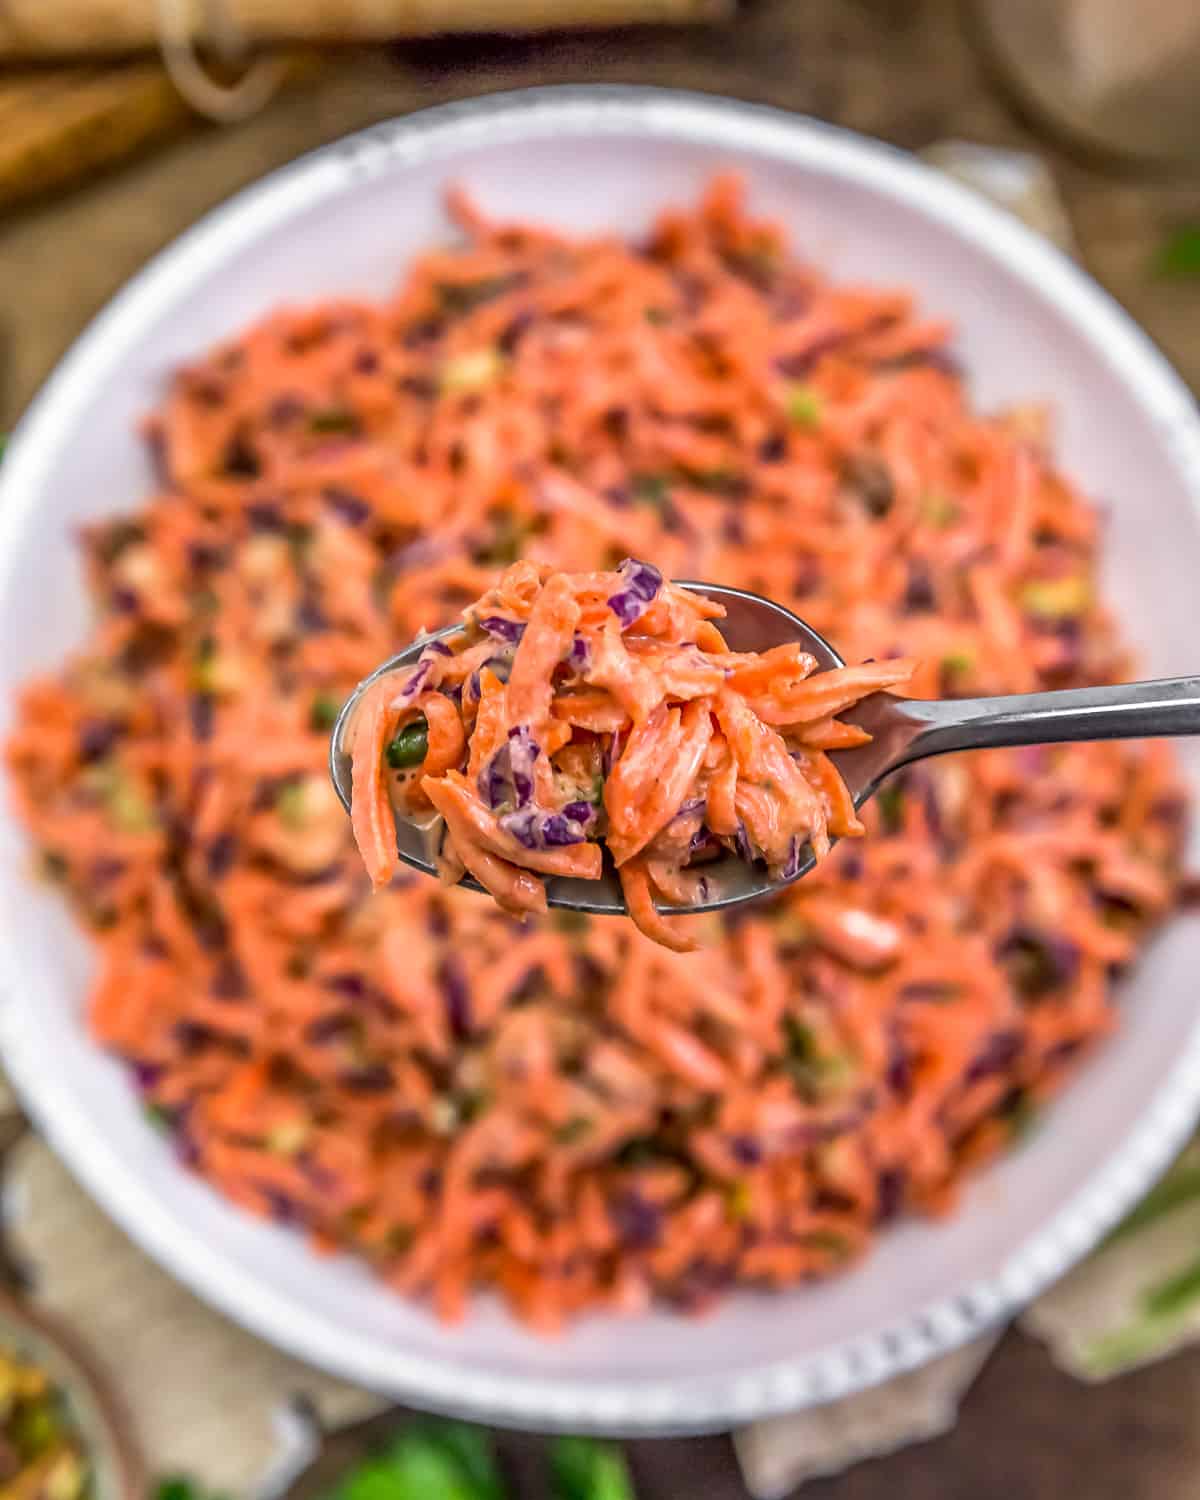 Carrot Salad with Maple Mustard Dressing